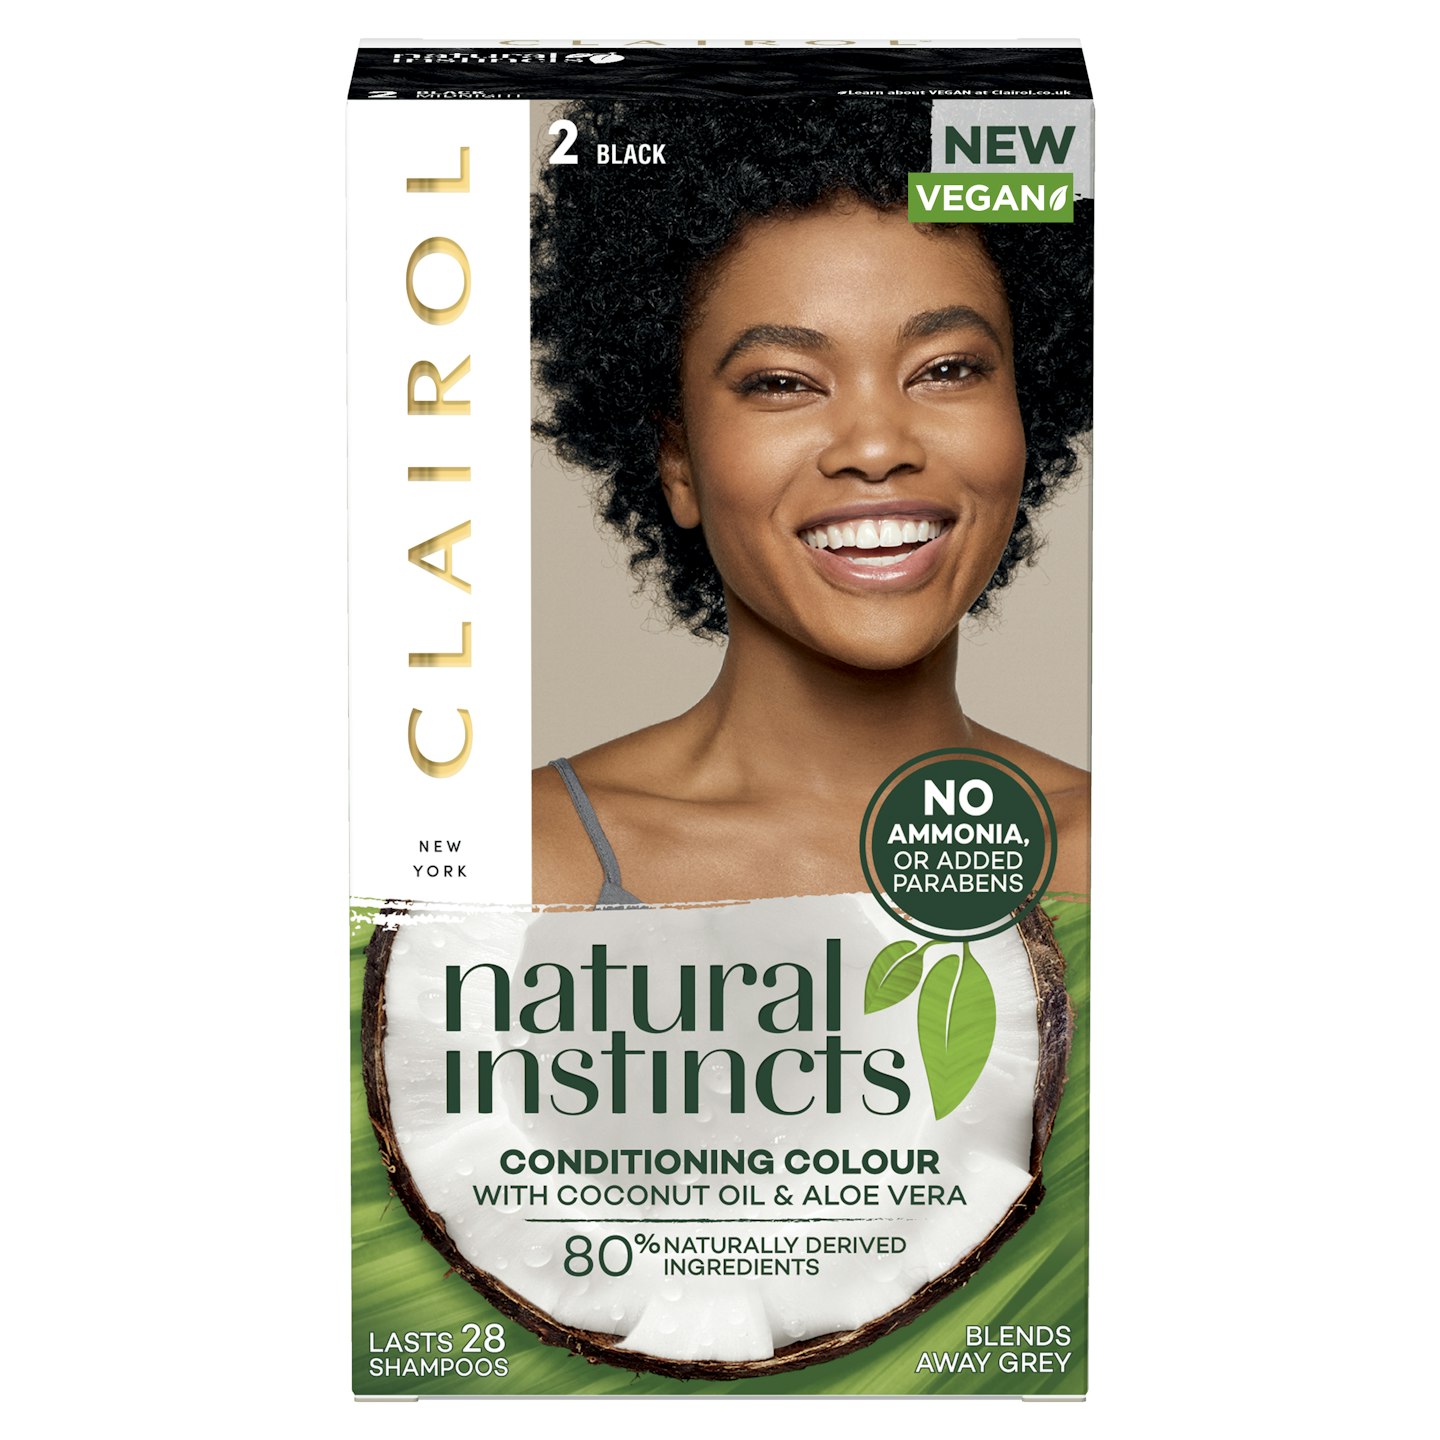 Clairol Natural Instincts Conditioning Colour, £6.99